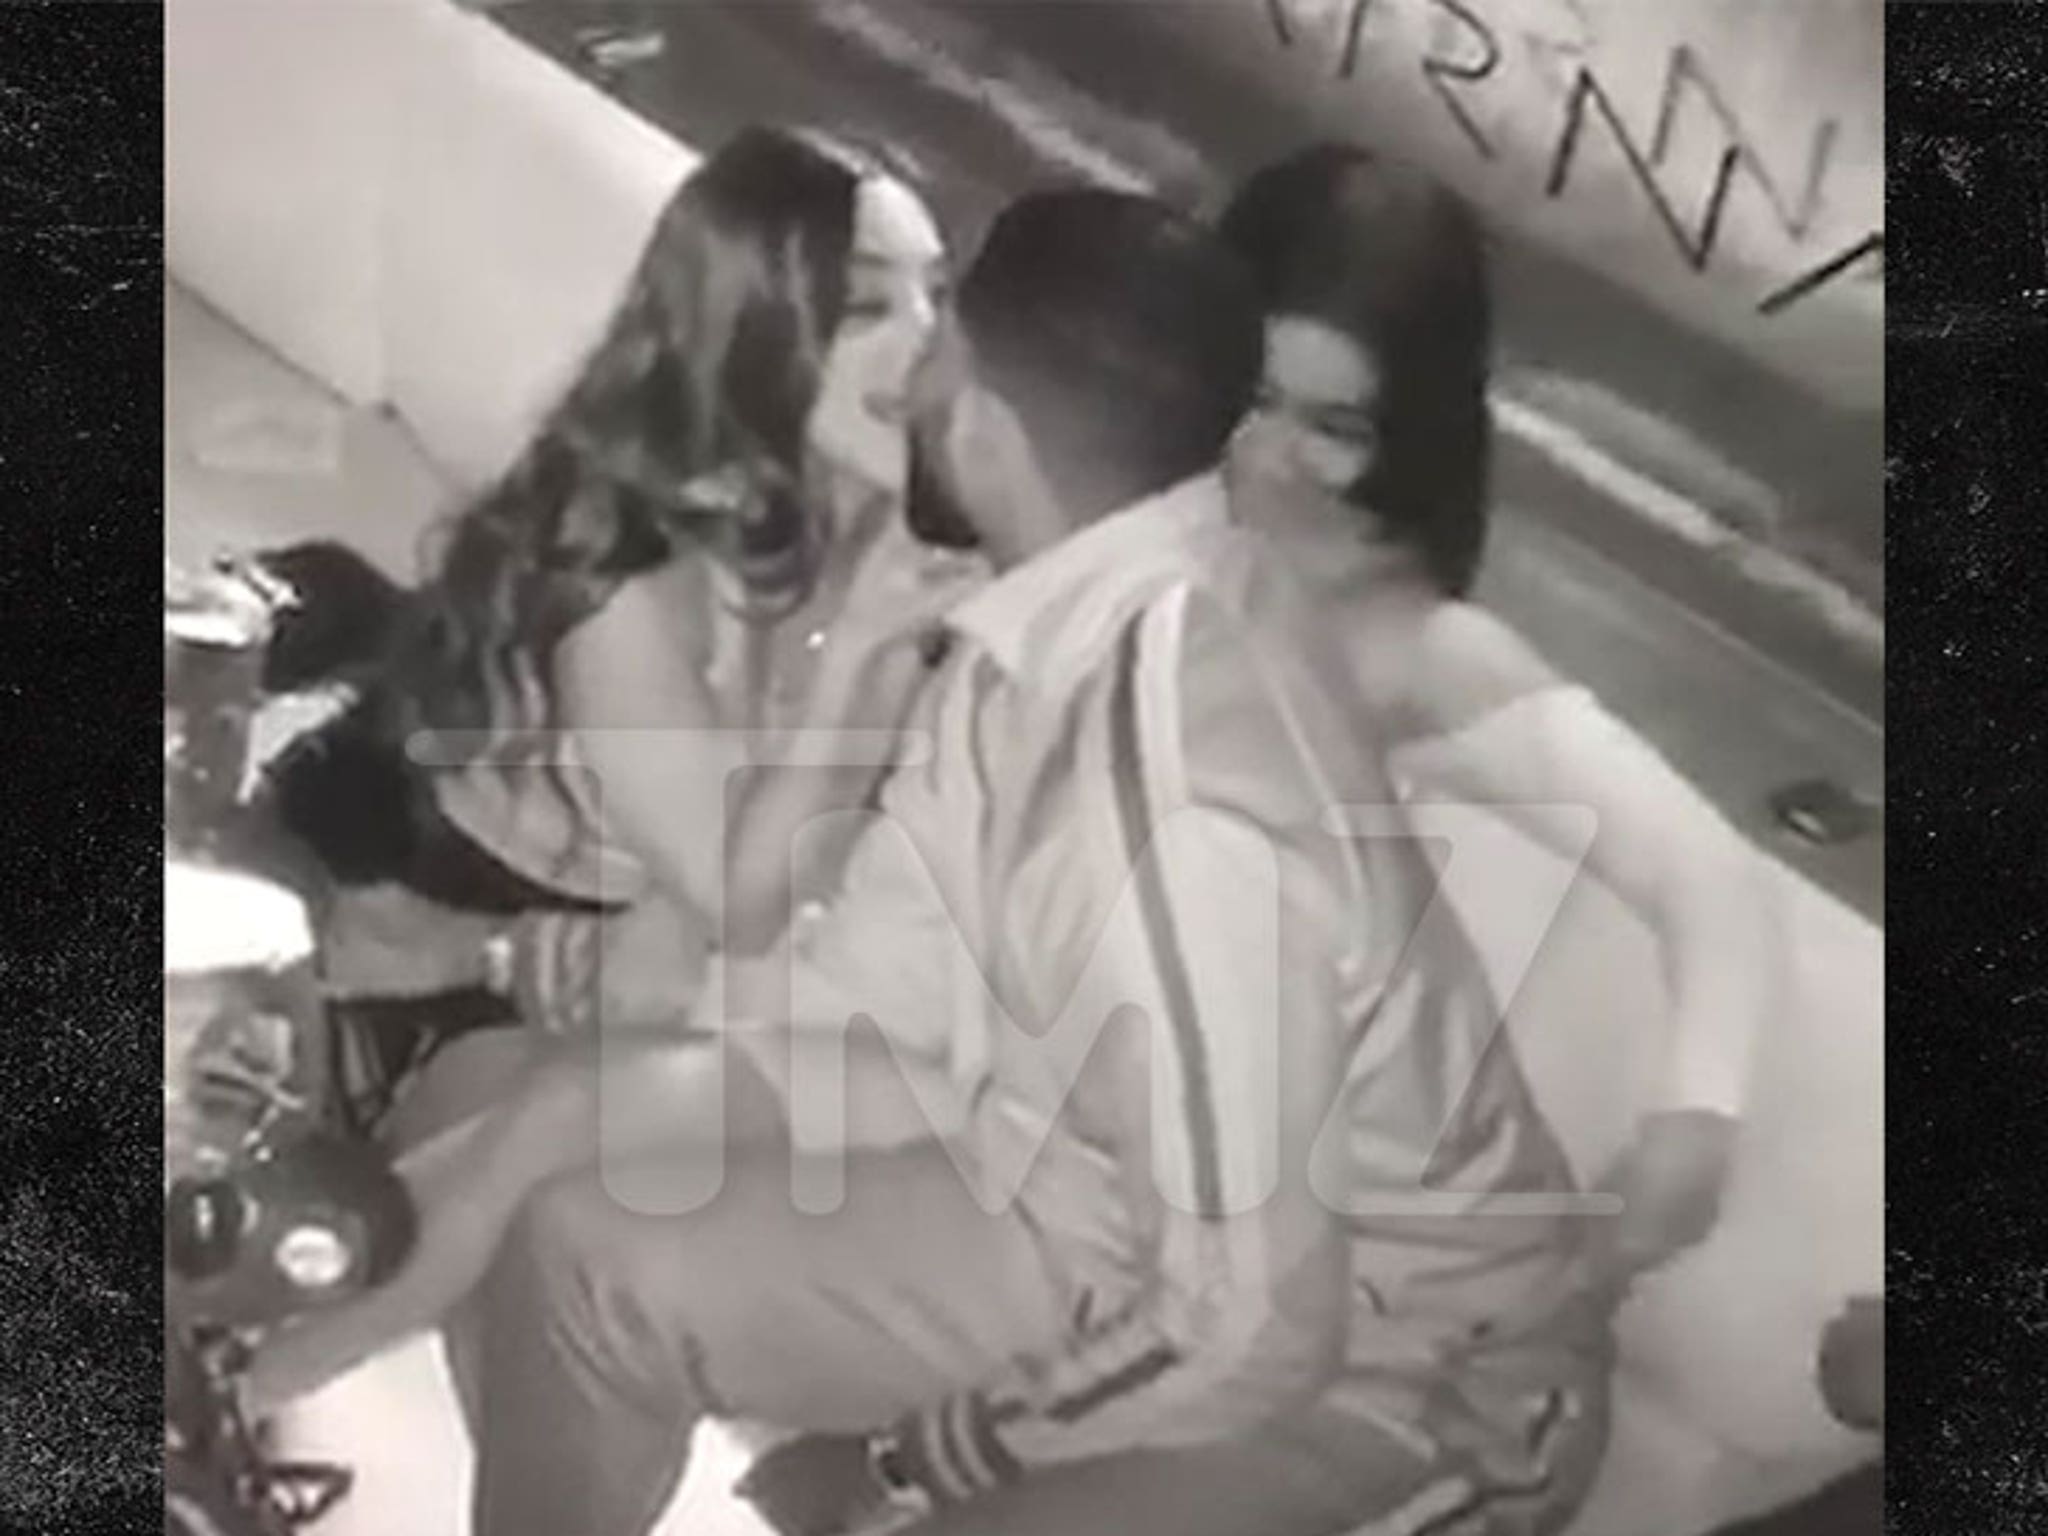 Tristan Thompson Cheating on Khloe Kardashian with 2 Women in New Video pic pic